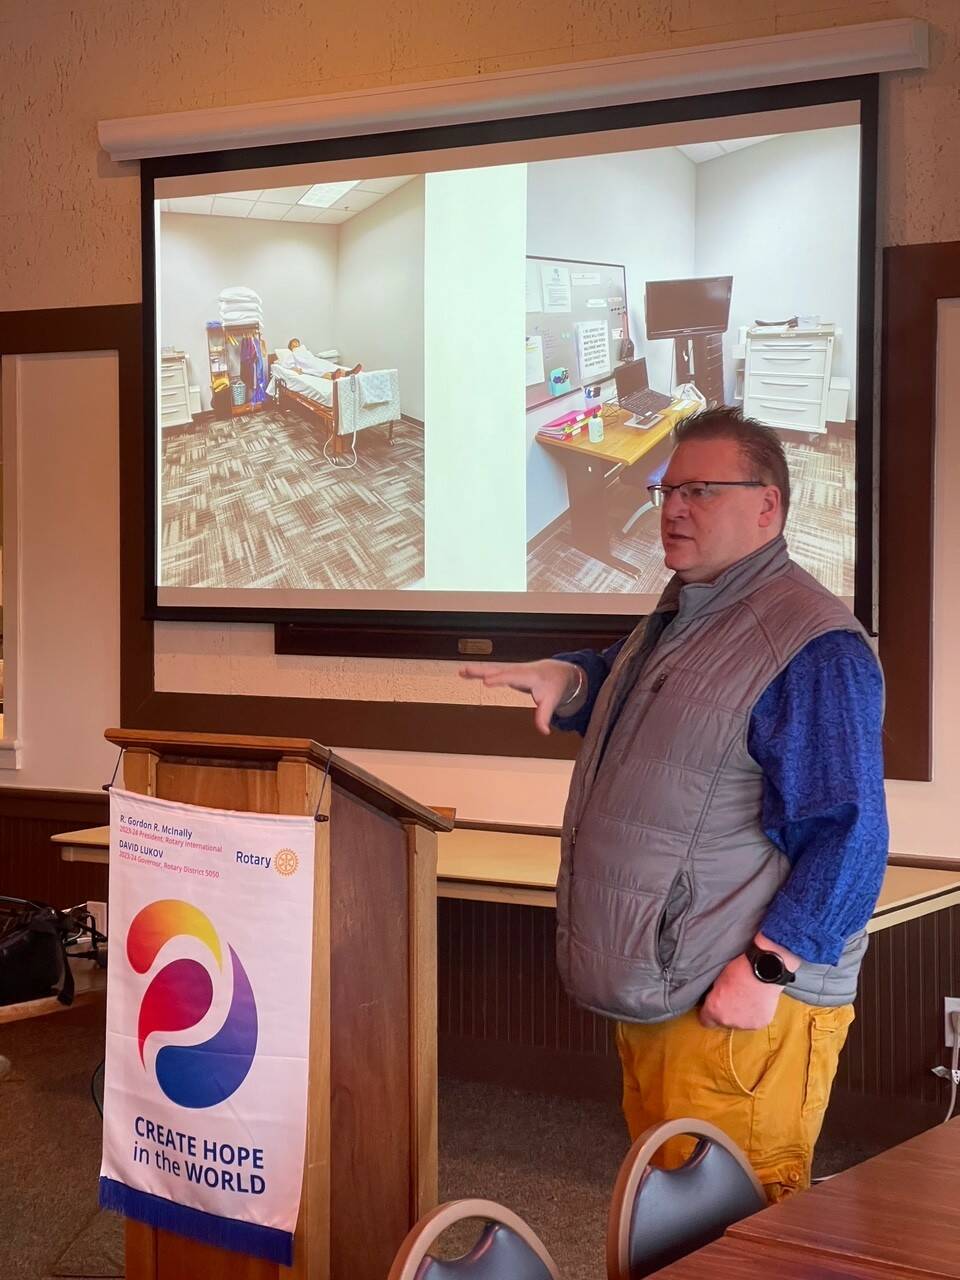 Contributed photo
Evan Perrollaz shares exciting news with the Rotary Club.